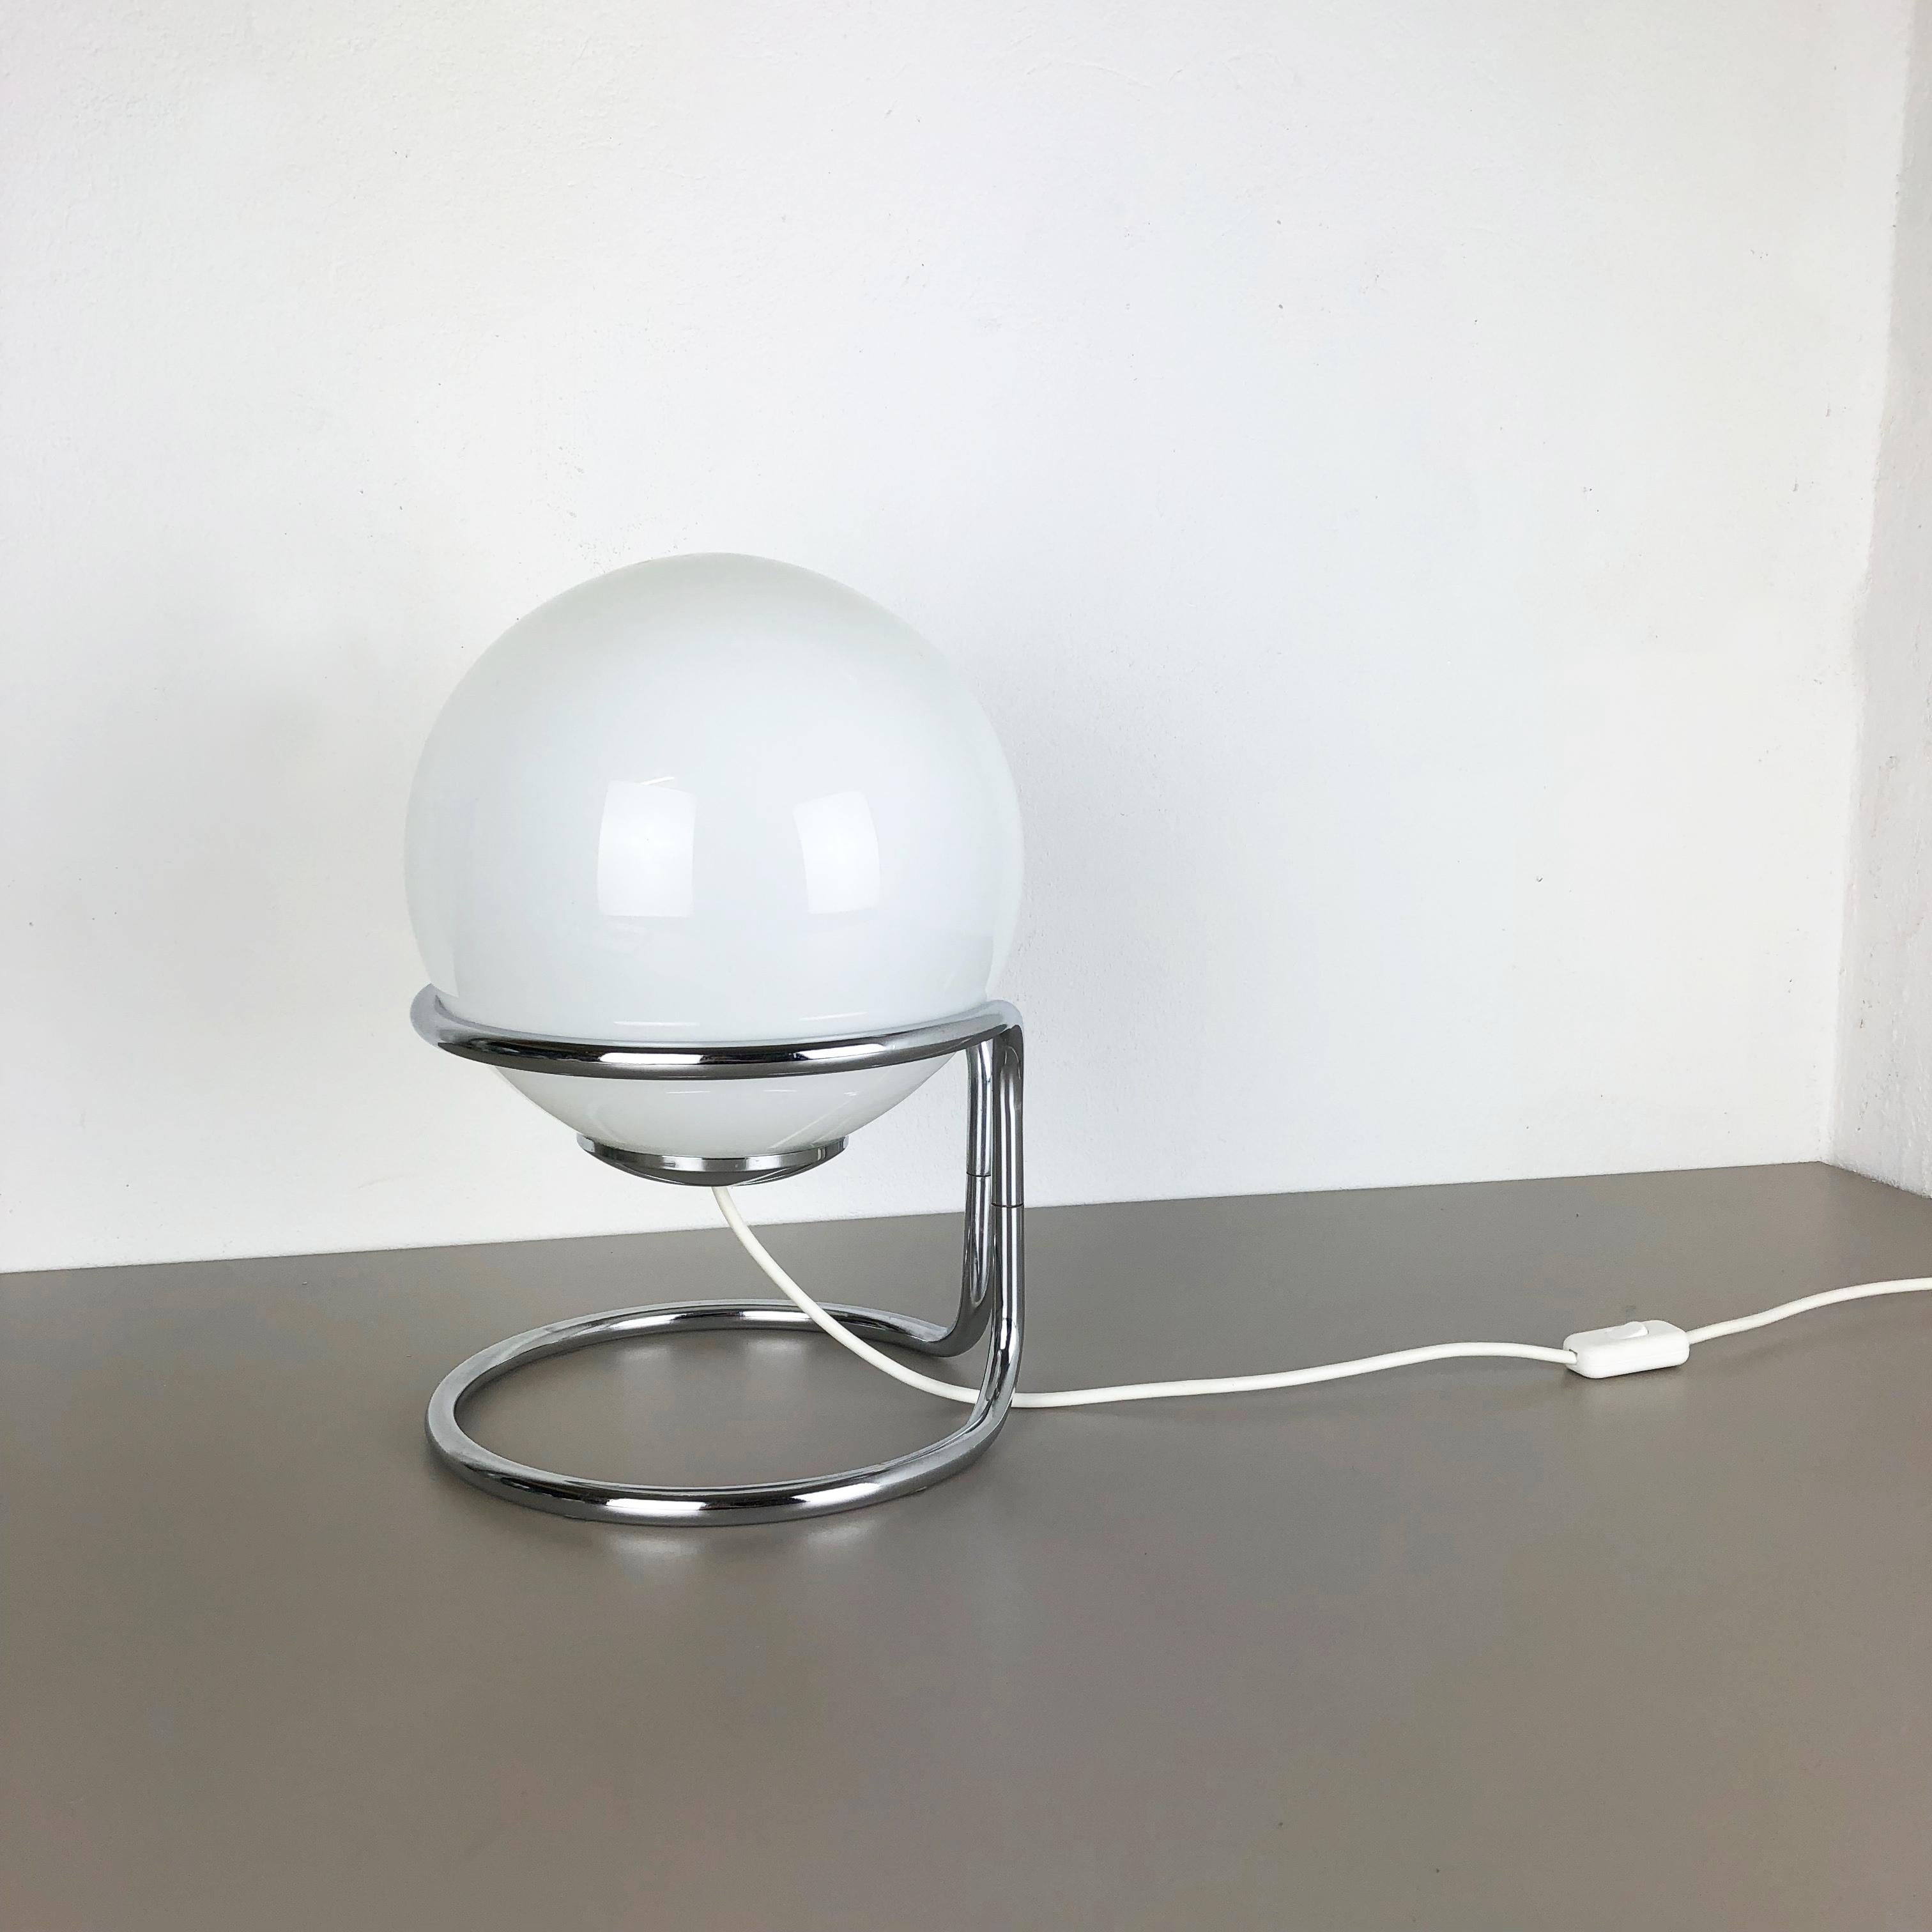 Article:

Sputnik table light


Producer:

Honsel Lights, Germany


Origin:

Germany



Age:

1970s



This 1970s table light was made by Honsel Lights in Germany. The light is made of solid metal in chrome tone finish, its